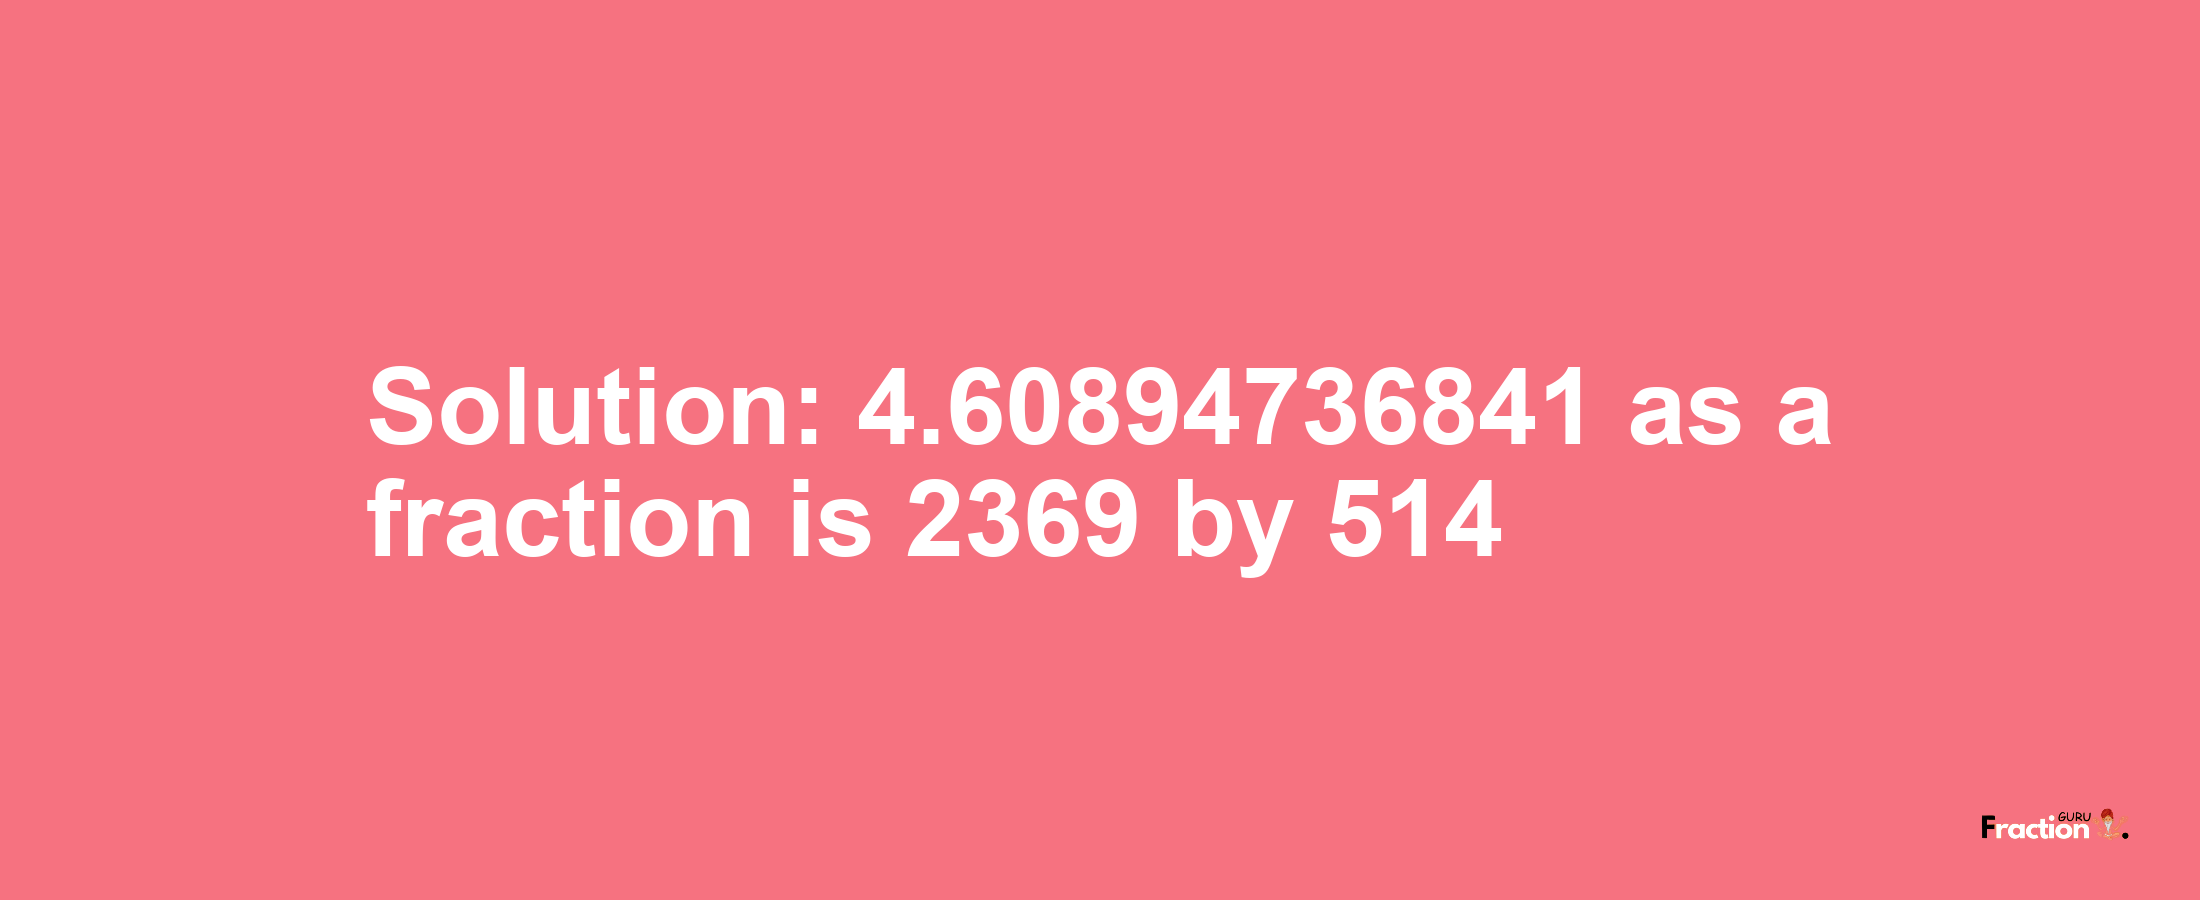 Solution:4.60894736841 as a fraction is 2369/514